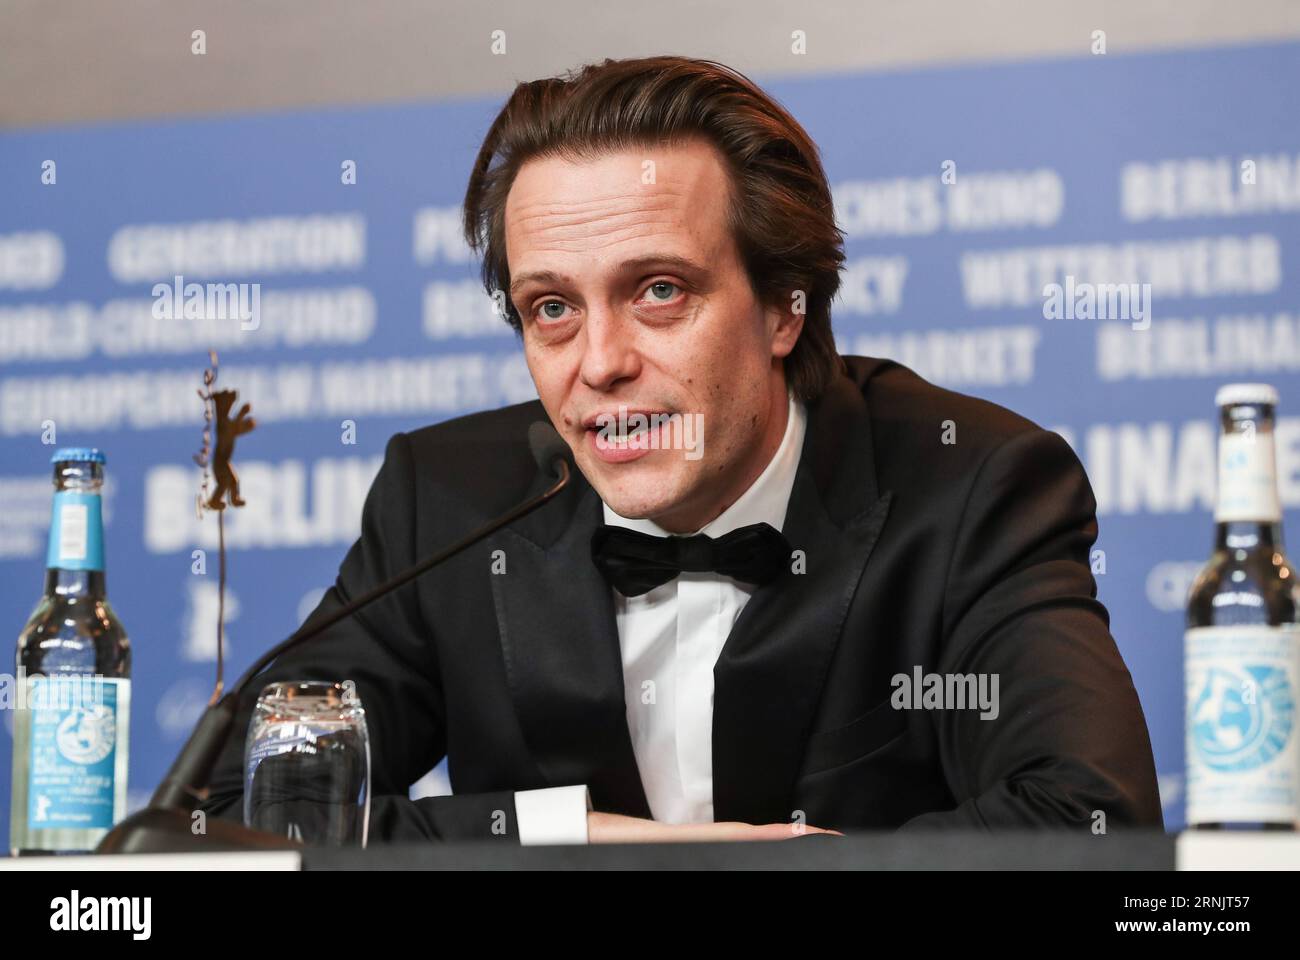 Actor August Diehl attends a press conference for the film Le jeune Karl Marx (The Young Karl Marx) during the 67th Berlinale International Film Festival in Berlin, capital of Germany, on Feb. 12, 2016. The 67th Berlin International Film Festival runs from Feb. 9 to 19, during which a total of 399 films from 72 countries and regions will be screened and a series of cultural events will be held. )(gj) GERMANY-BERLIN-67TH BERLINALE- LE JEUNE KARL MARX ShanxYuqi PUBLICATIONxNOTxINxCHN   Actor August Diehl Attends a Press Conference for The Film Le Jeune Karl Marx The Young Karl Marx during The 67 Stock Photo